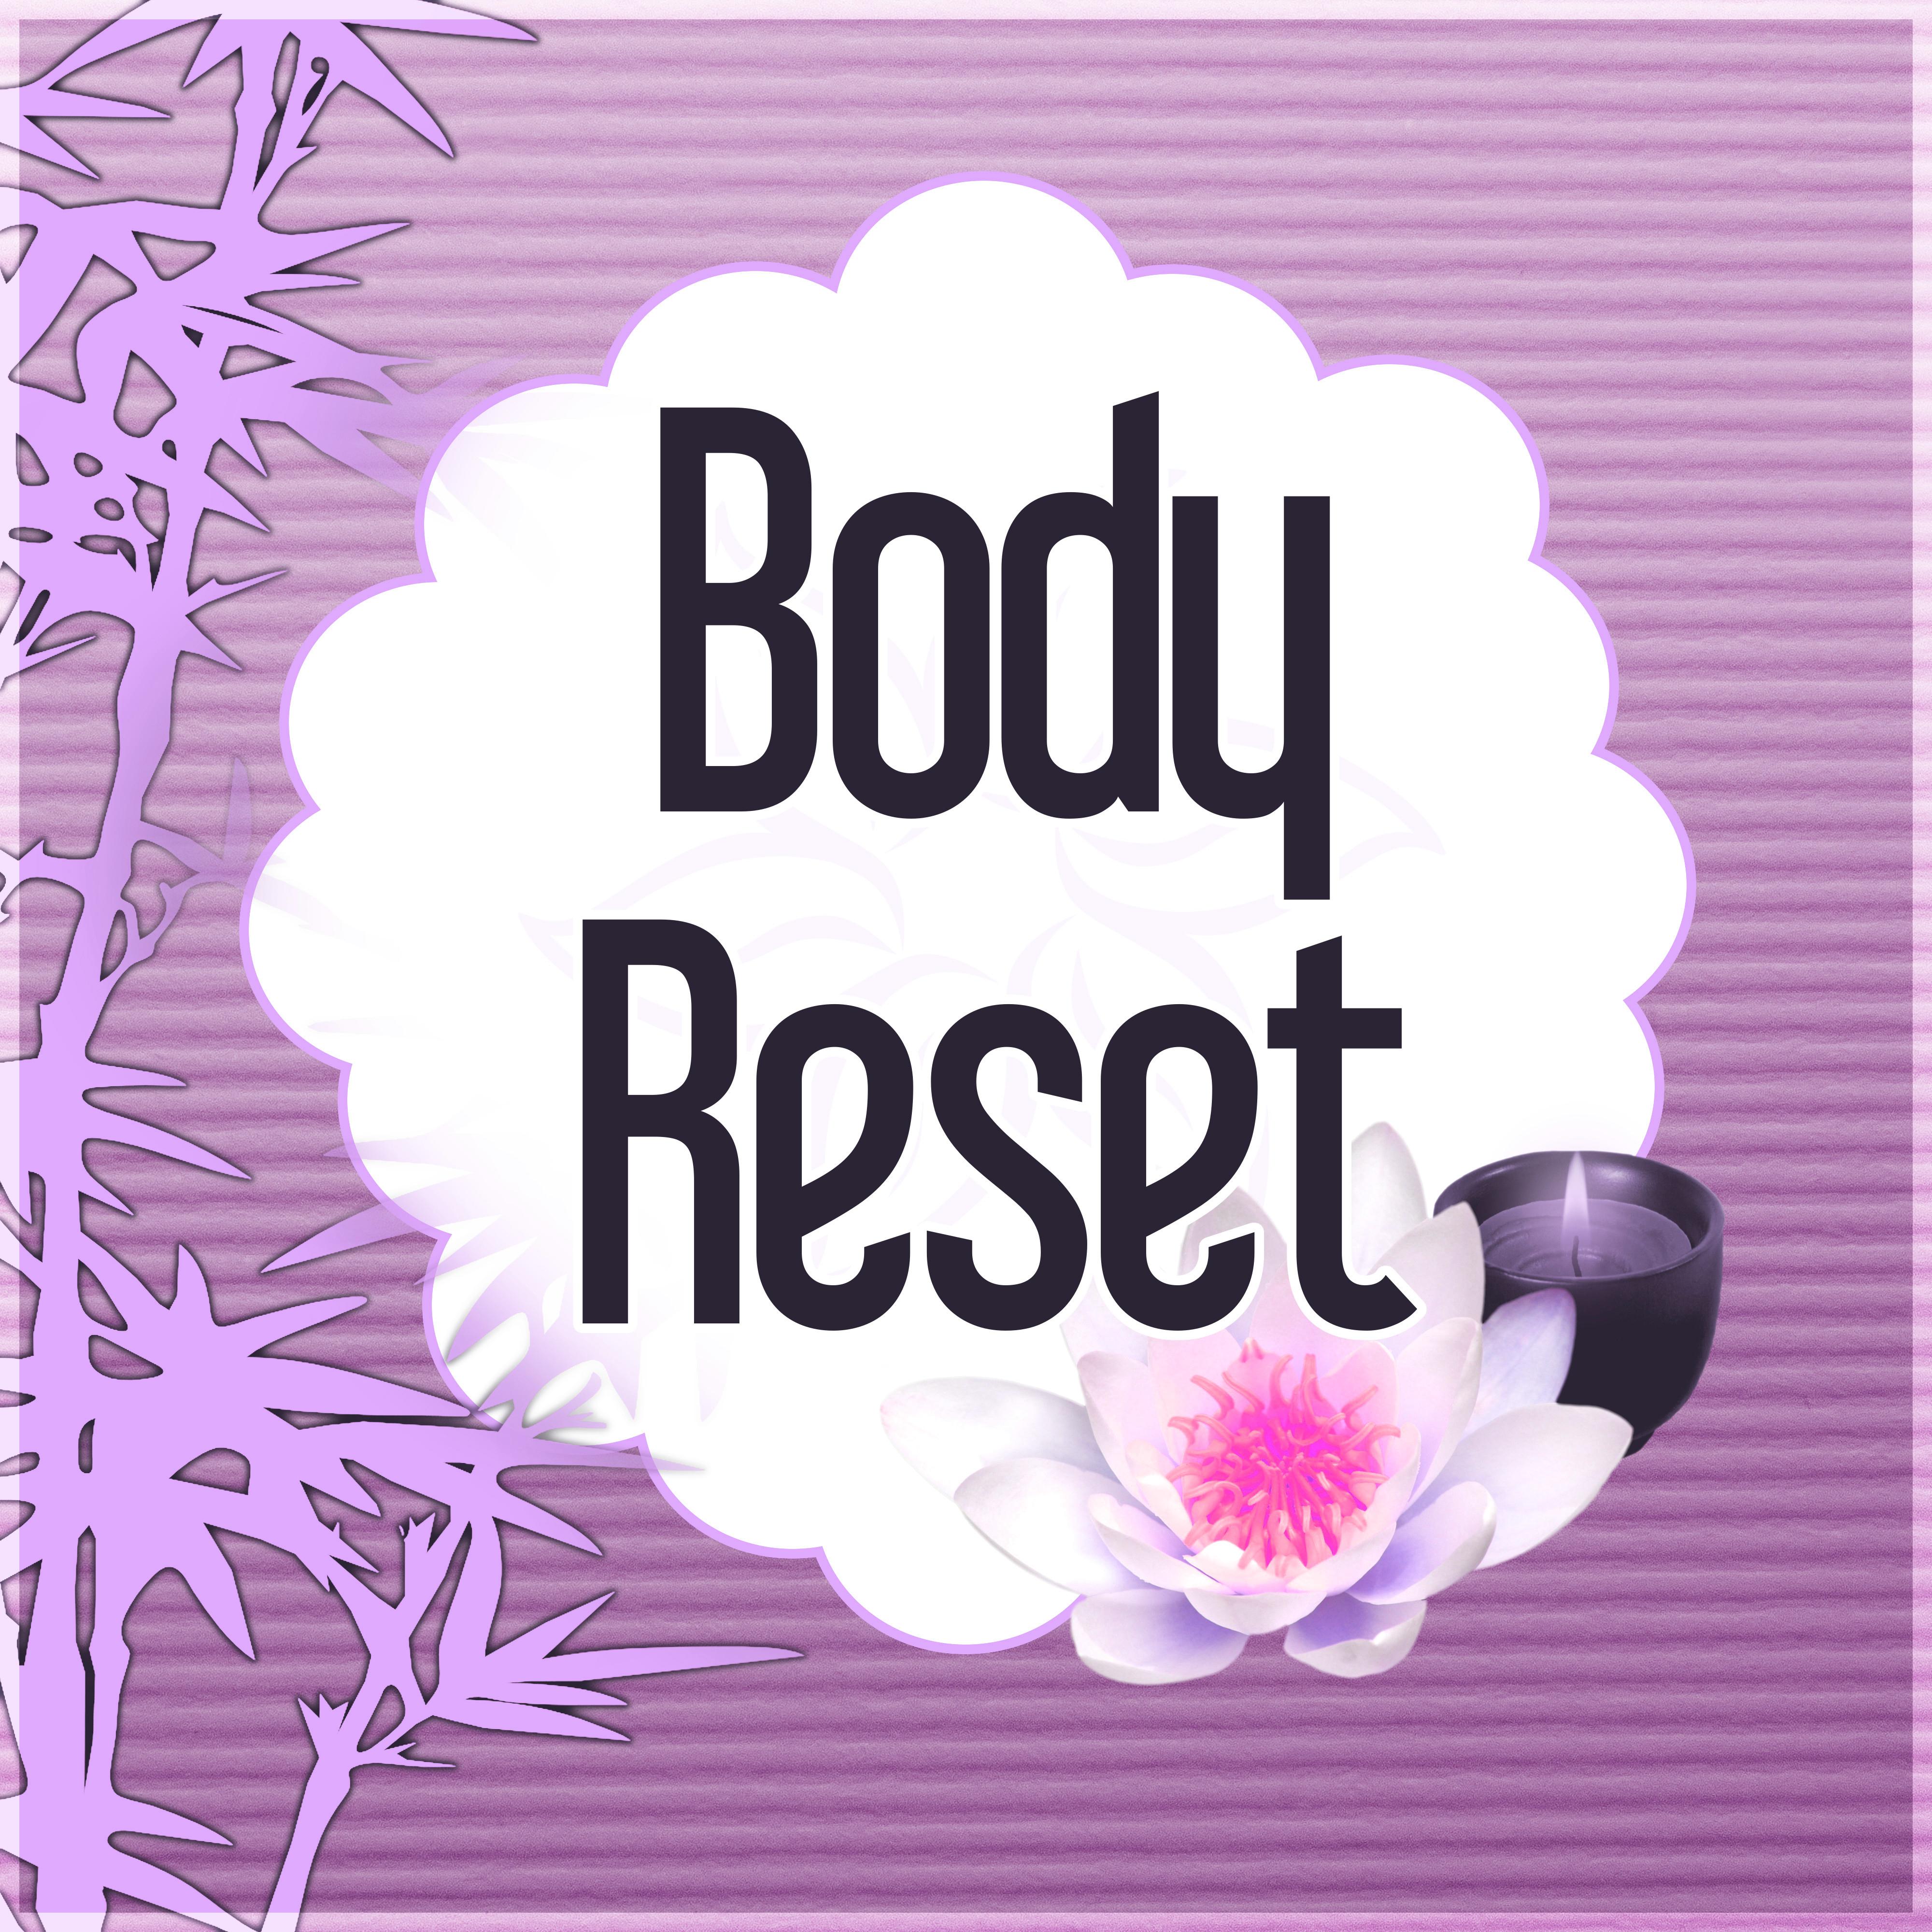 Body Reset - Time for Me, Easy Listening, Nature Sounds, Calm Down, Gentle Ambient Music